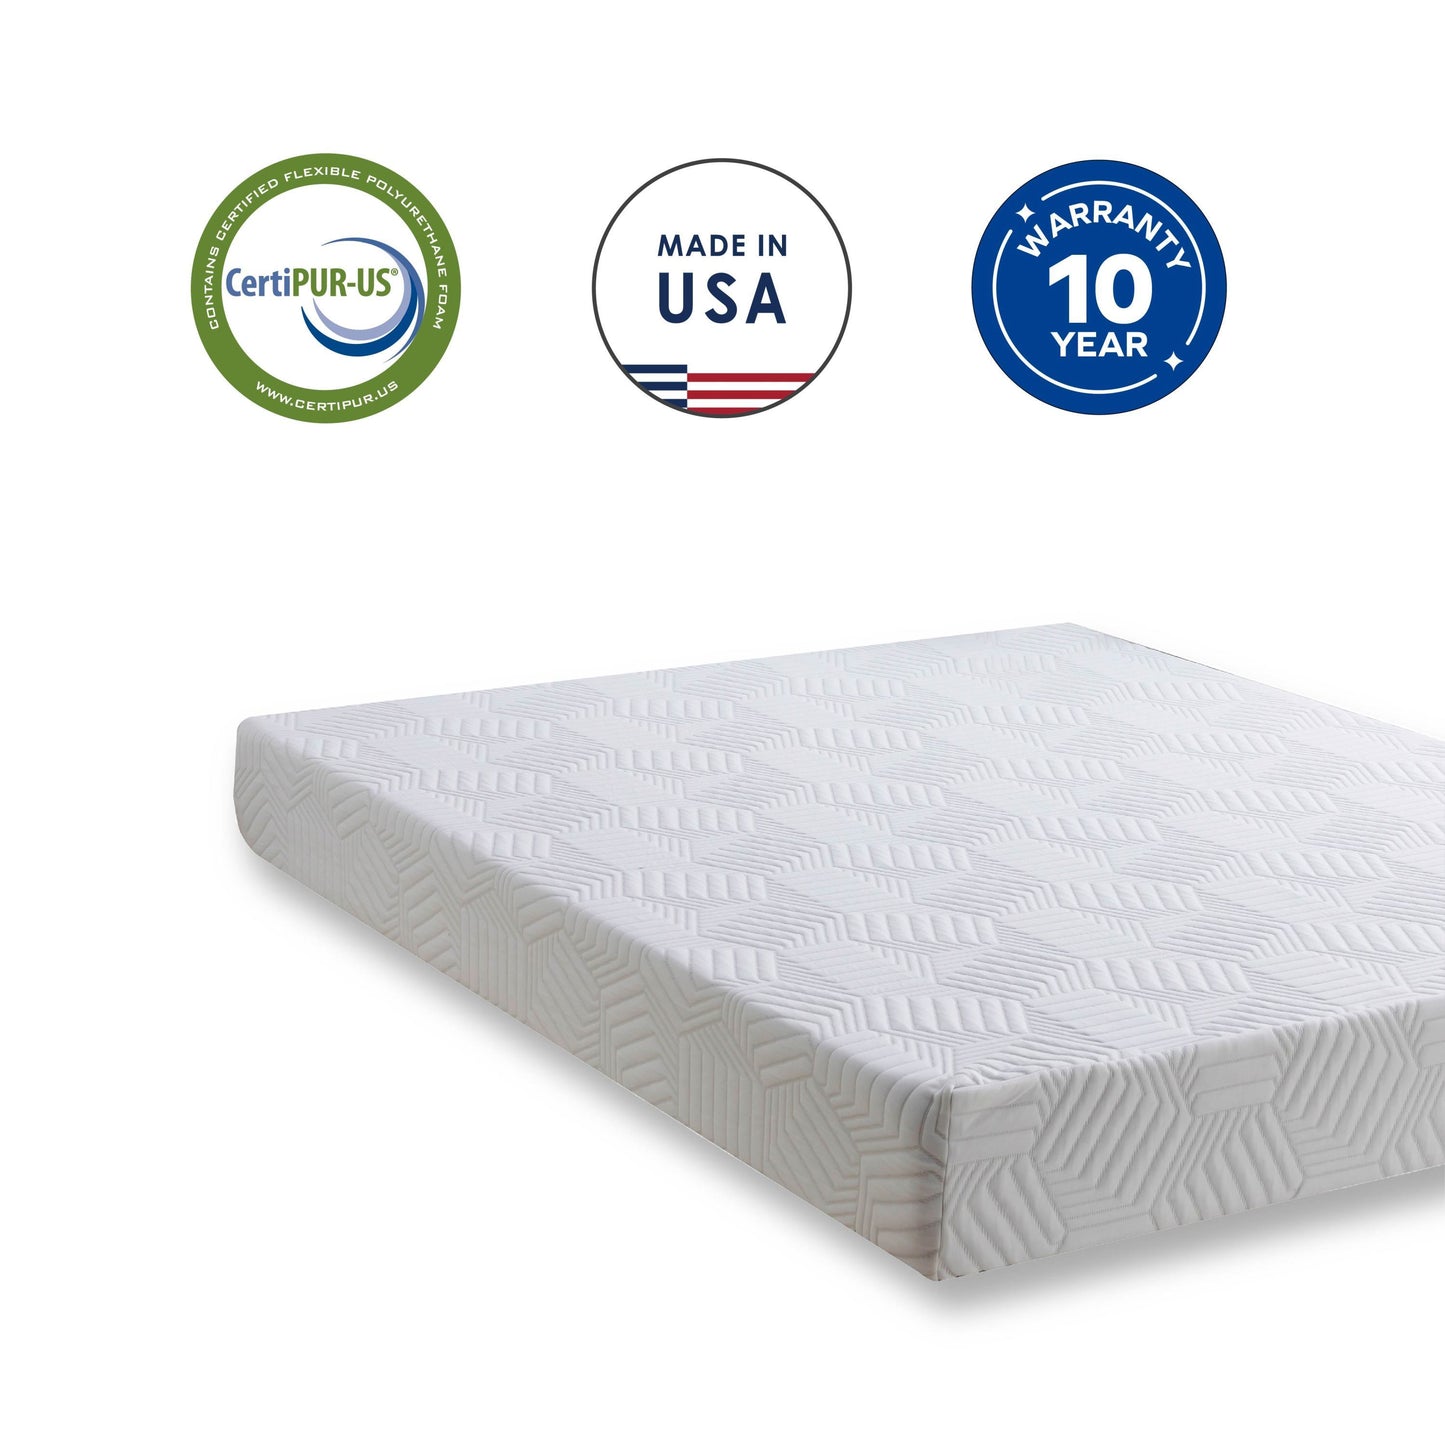 12 Inch King Gel Memory Foam Mattress, White, Bed in a Box, Green Tea and Cooling Gel Infused, CertiPUR-US Certified